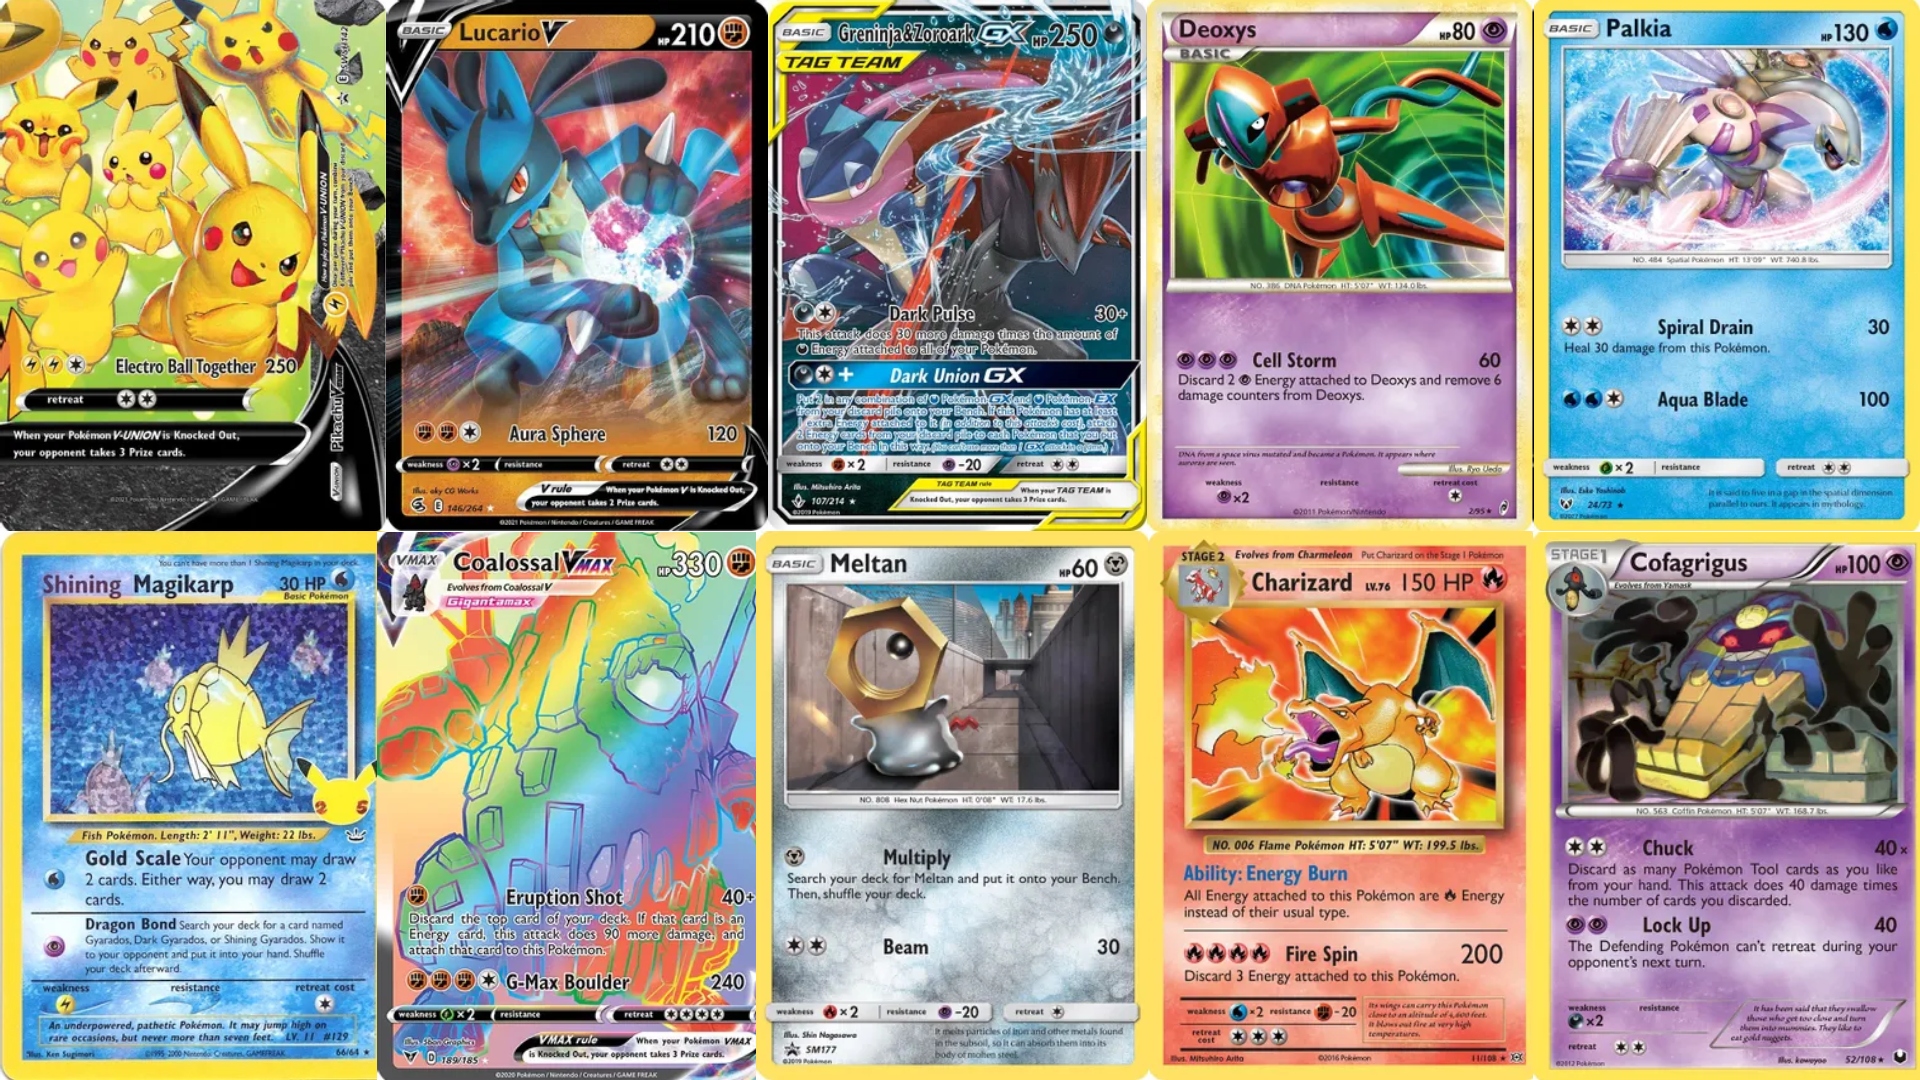 Email Tidligere Optø, optø, frost tø Where to buy Pokémon cards | Wargamer